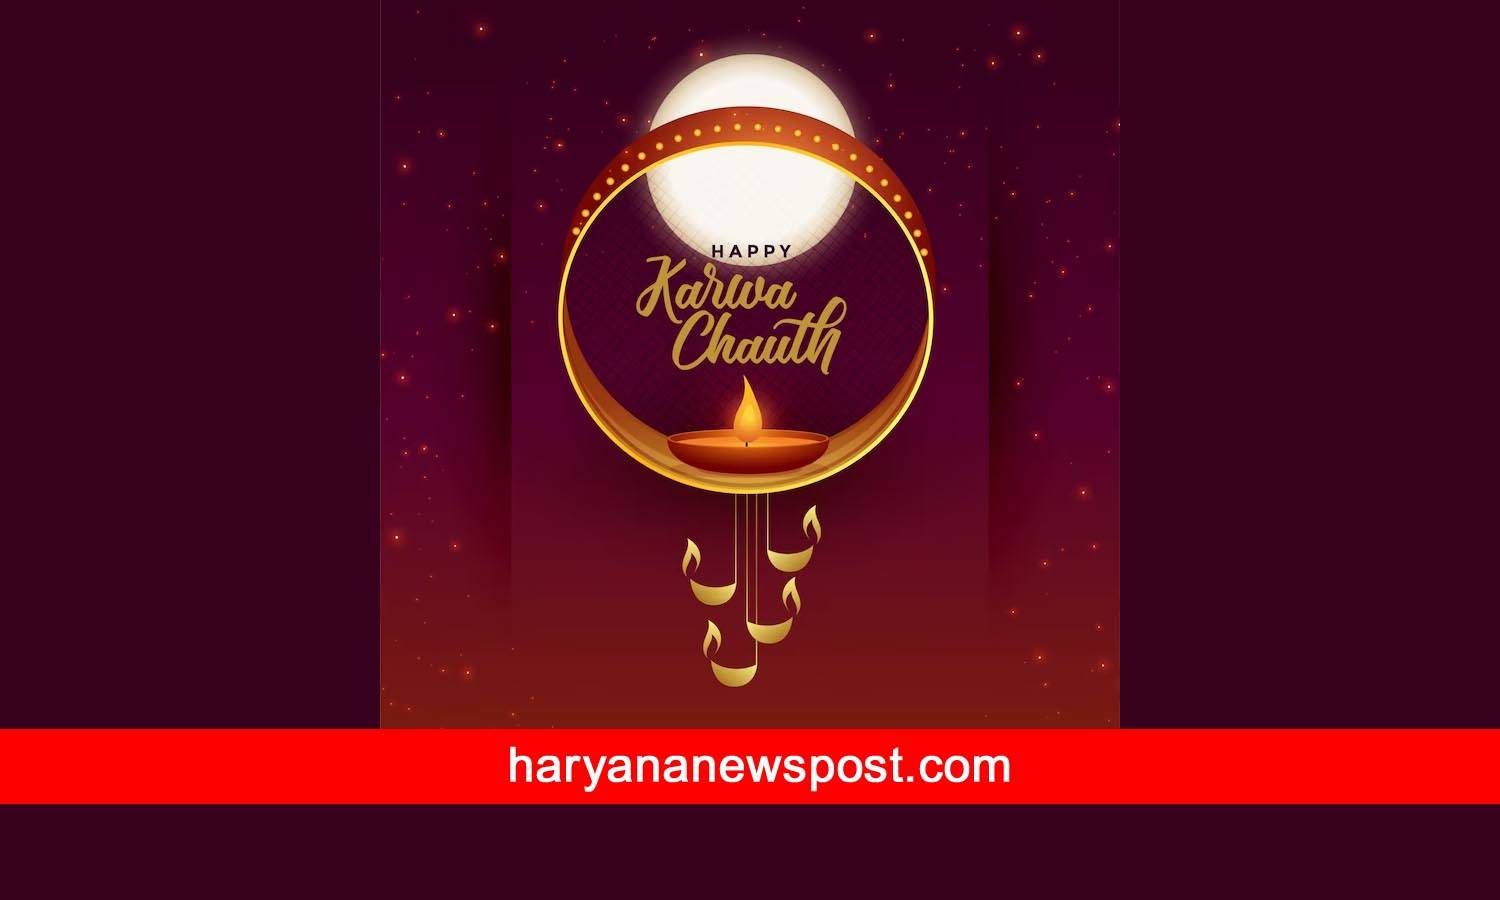 Happy Karva Chauth Wishes messages in Hindi for Husband